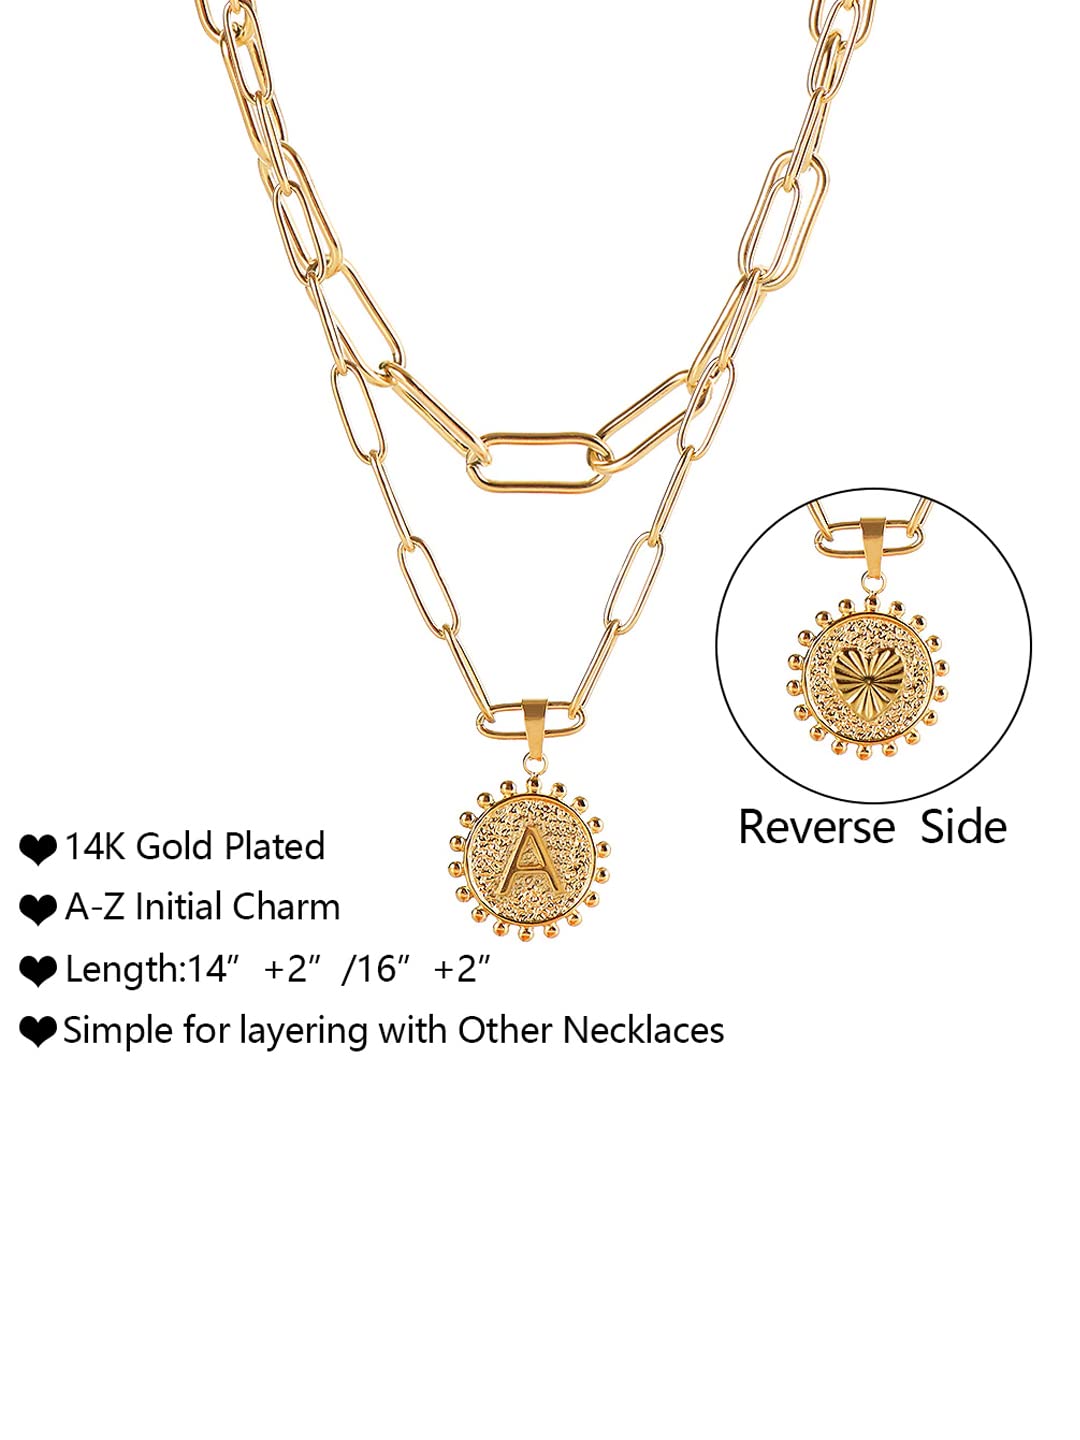 Buy Pretty Ponytails Layered Double Layer Chain Necklace Gold Silver Plated  Flower Pendant Office Wear Party Western Boho Jewellery at Amazon.in